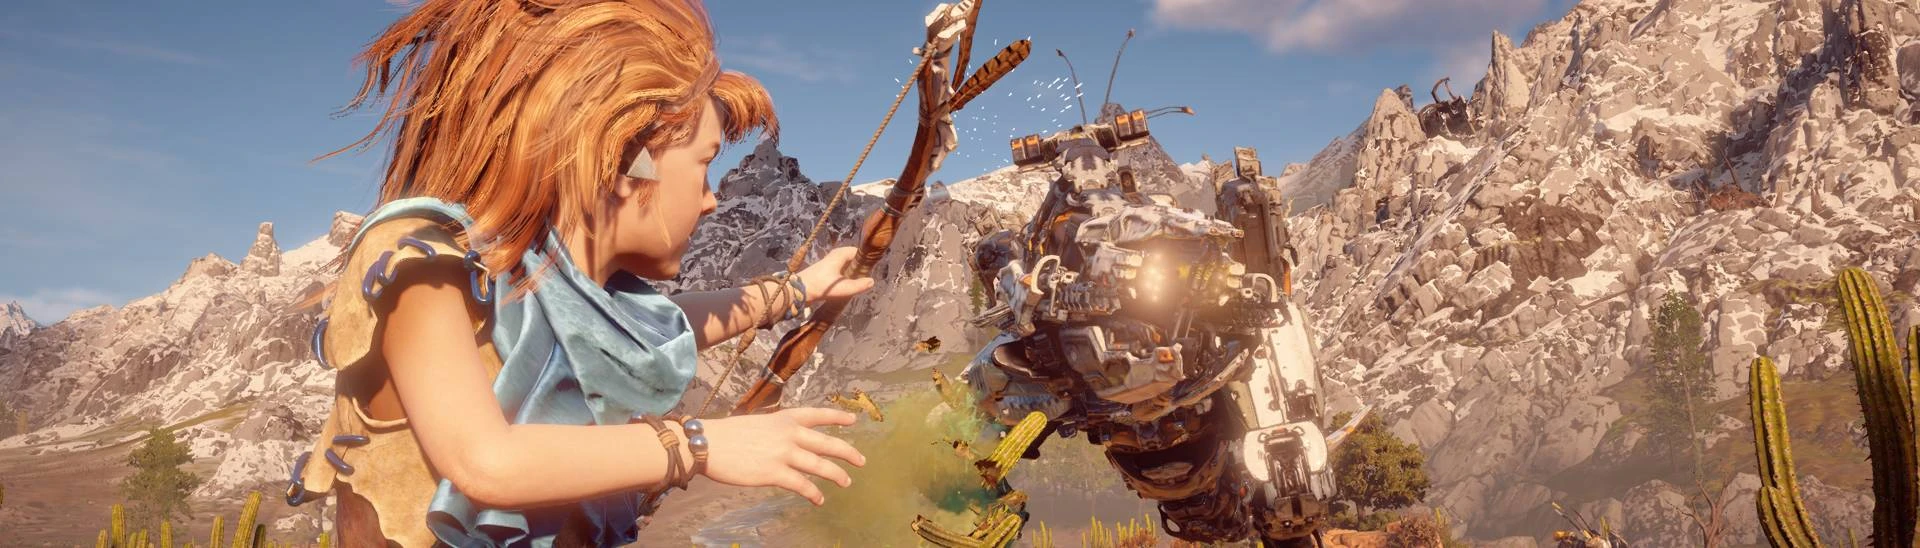 Horizon Zero Dawn comes to Fallout 4 with this authentic Aloy mod